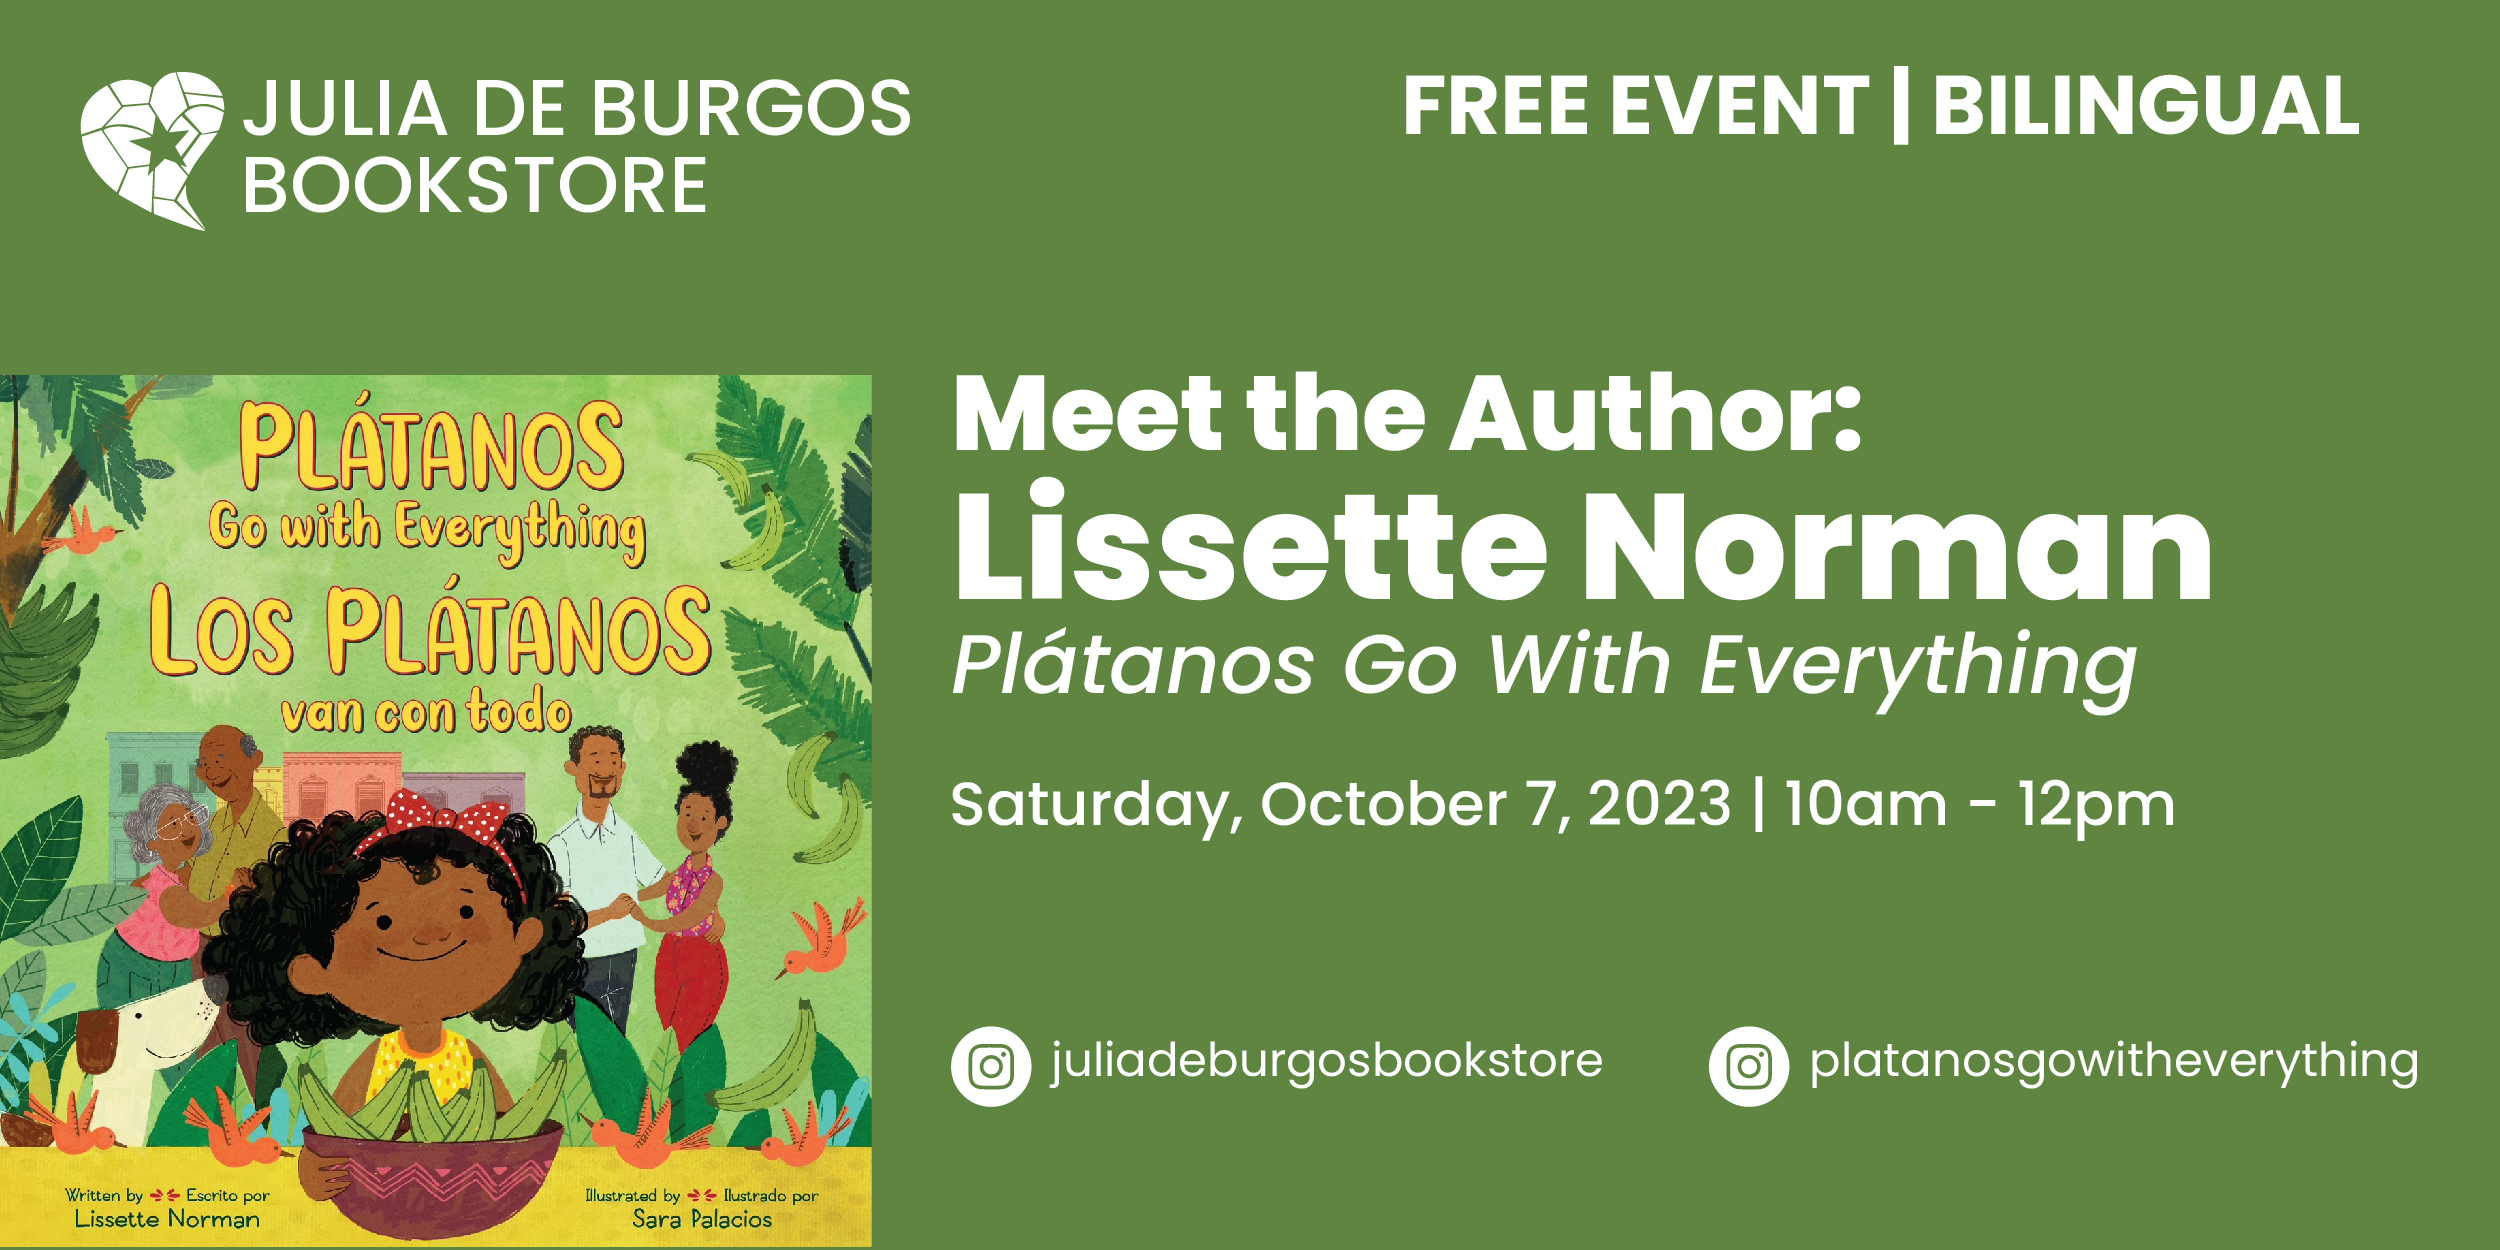 Meet the Author & Storytime: Plátanos Go With Everything